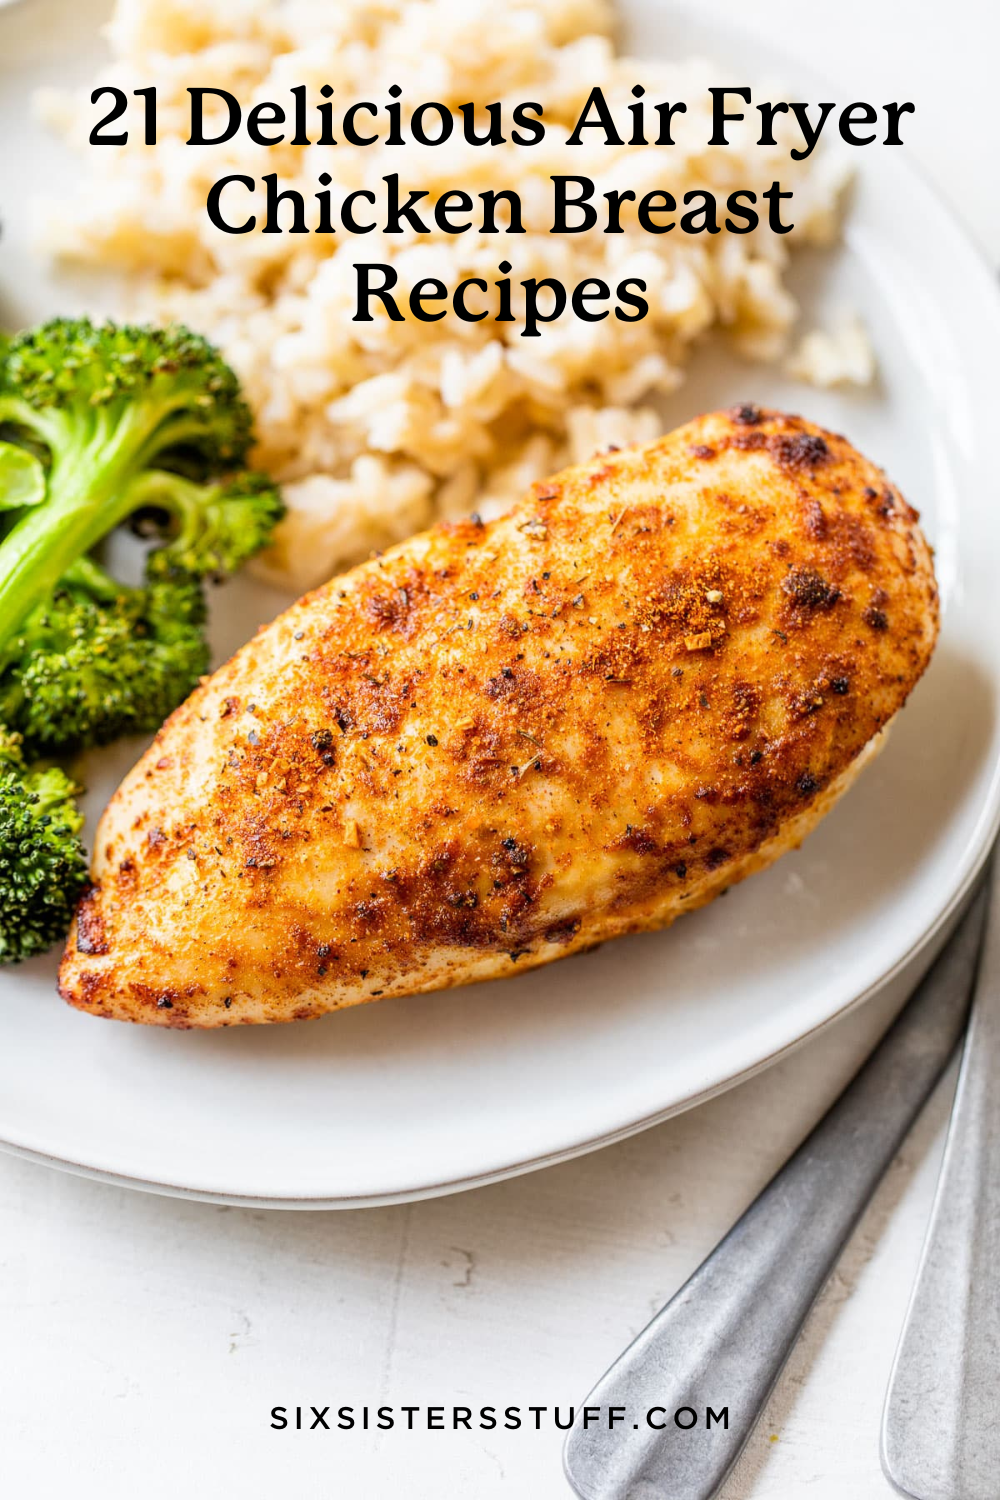 https://www.sixsistersstuff.com/wp-content/uploads/2023/06/21-Delicious-Air-Fryer-Chicken-Breast-Recipes.png